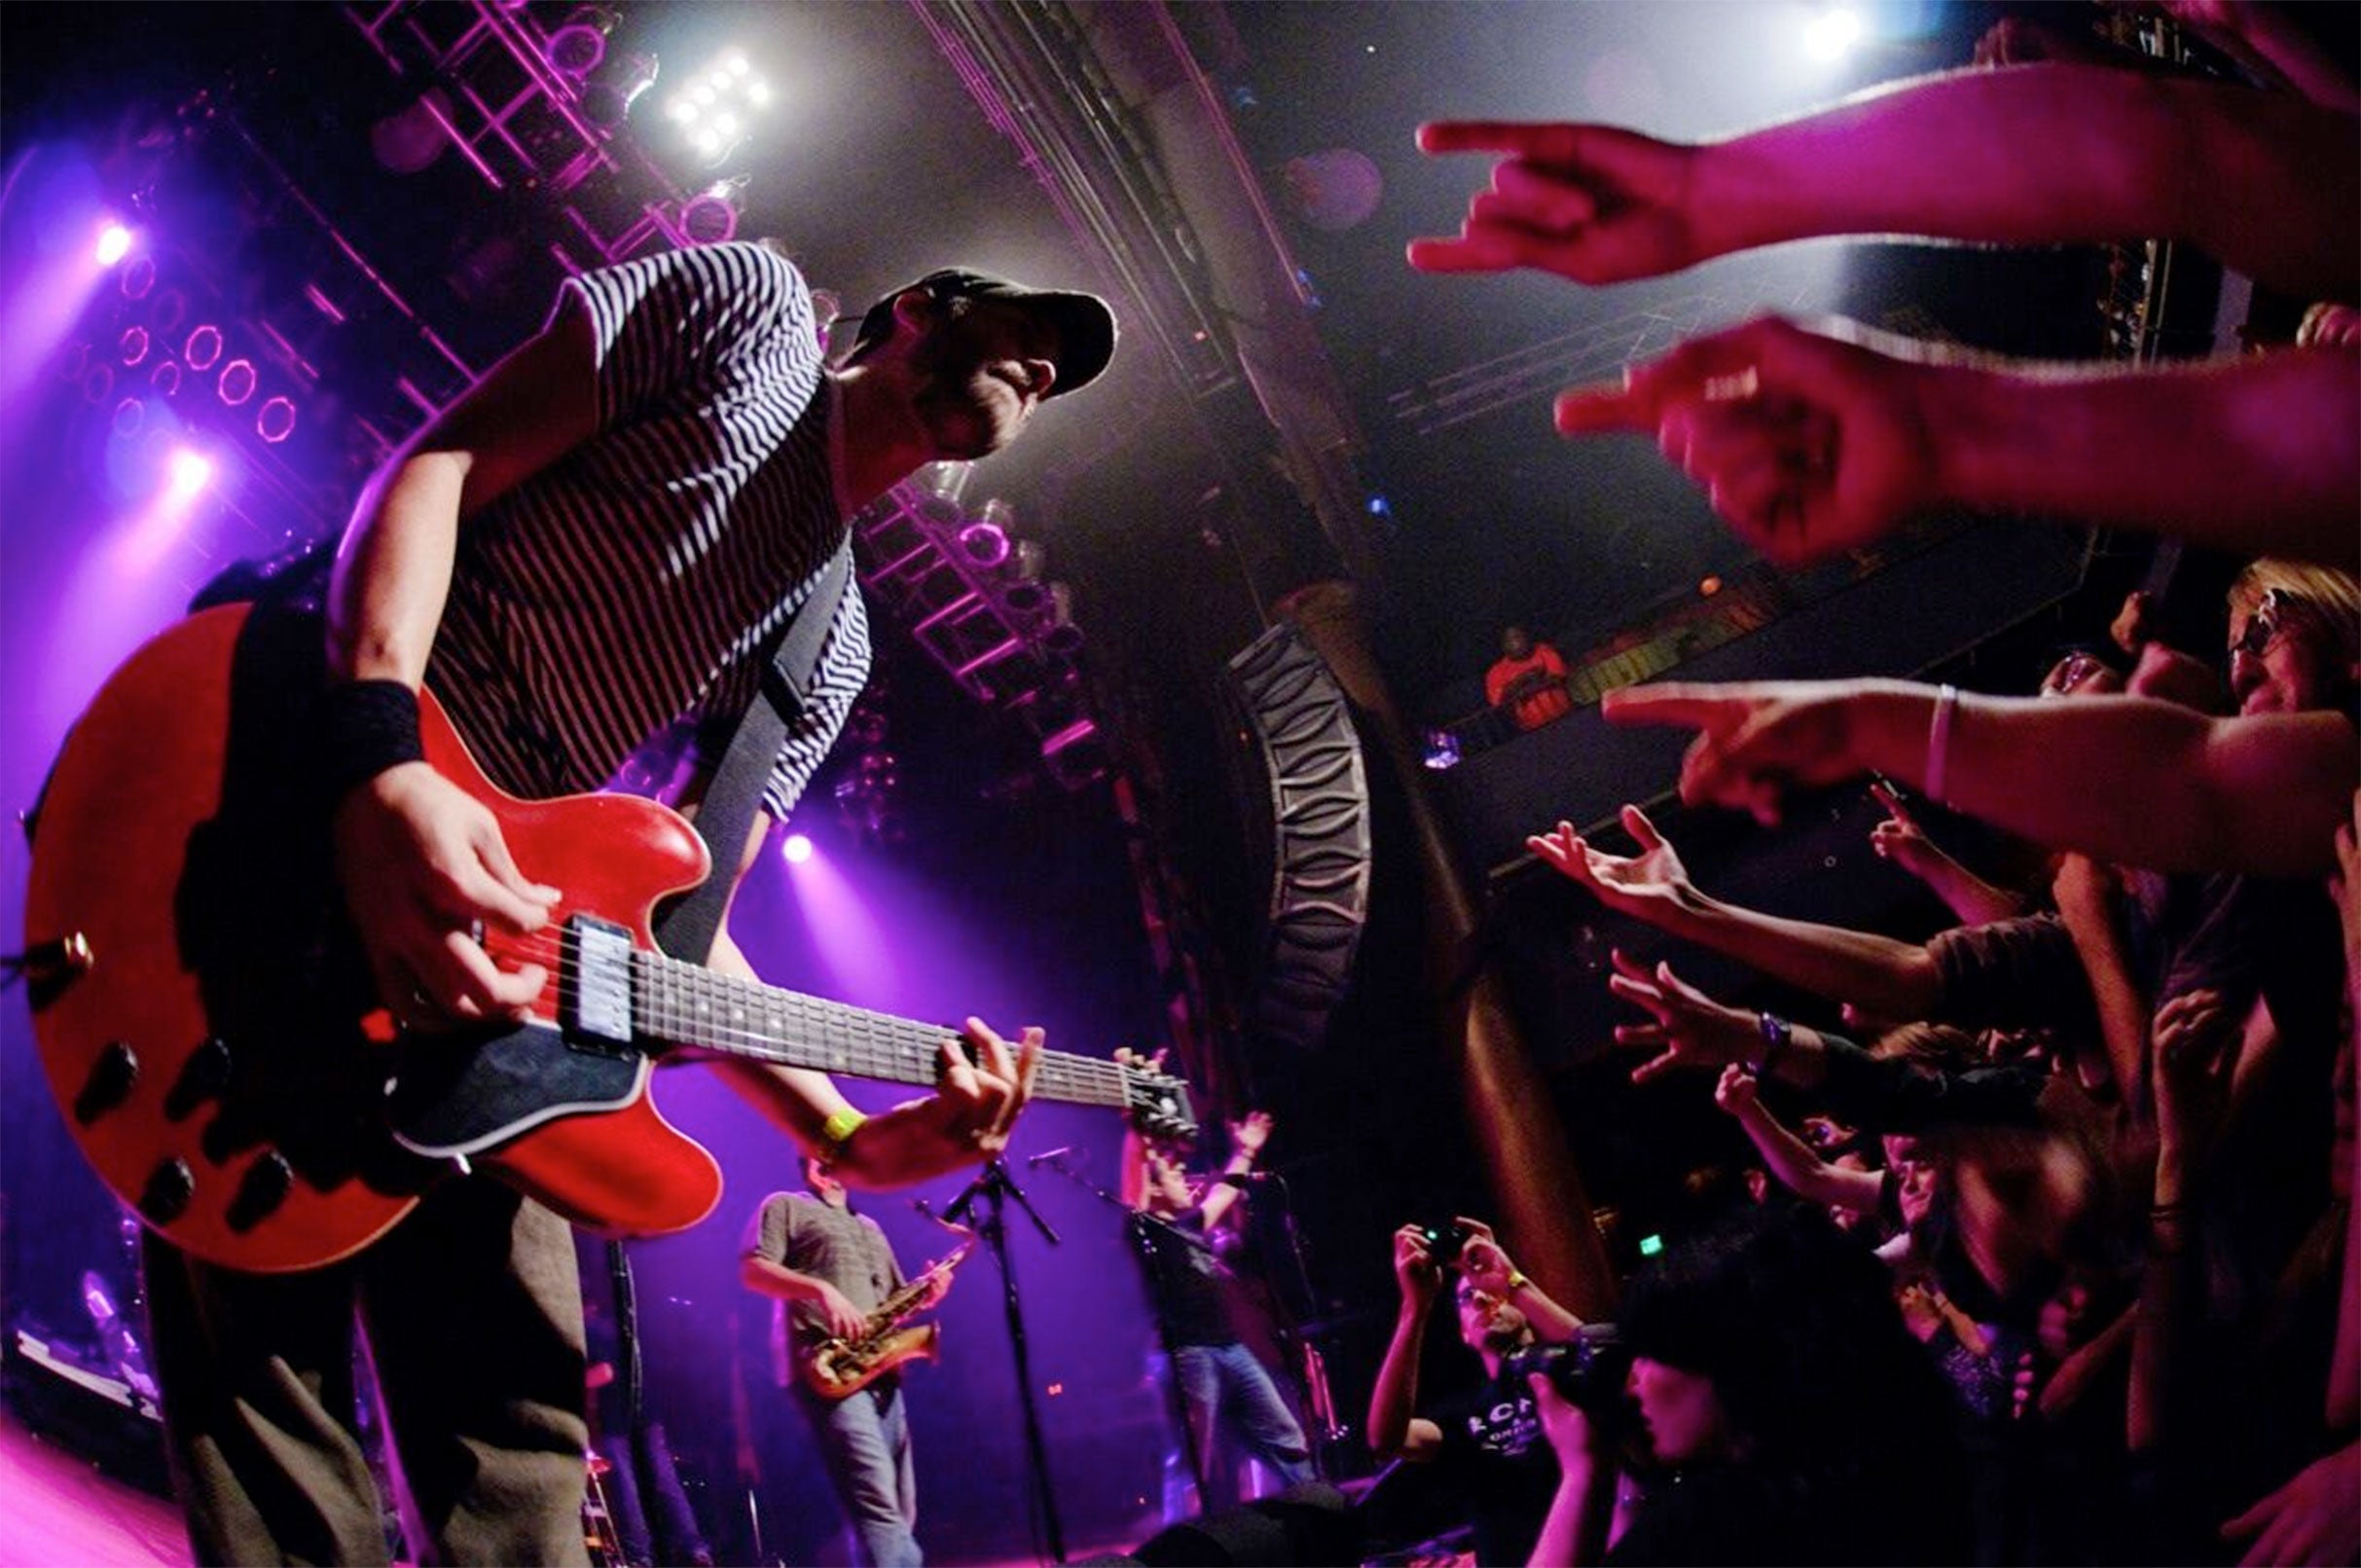 Streetlight Manifesto pre-sale password for approved tickets in Toronto